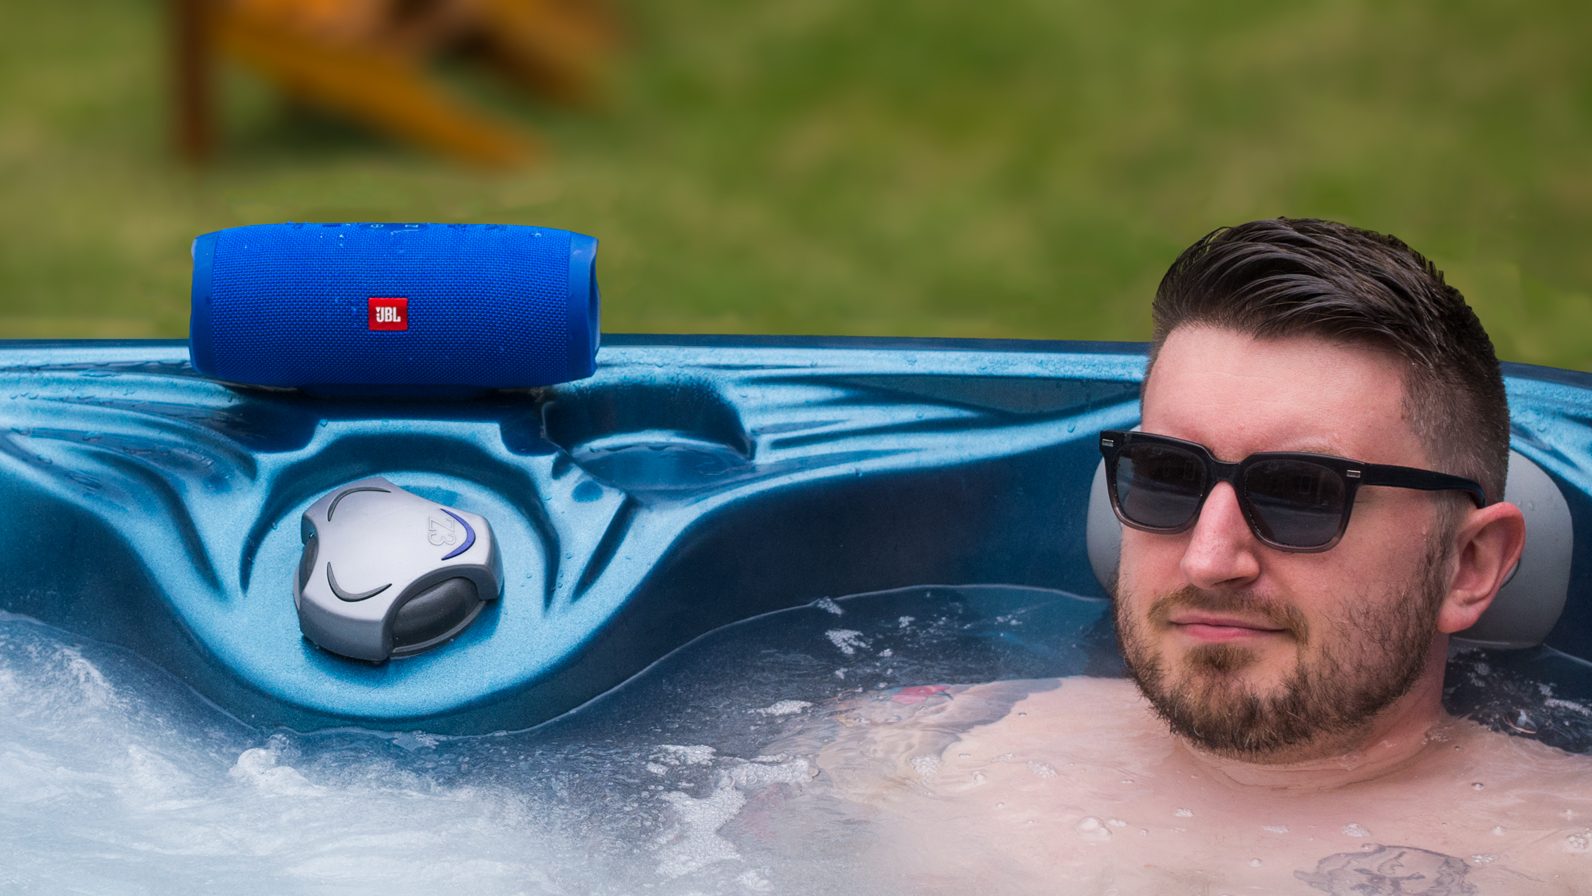 A photo of the JBL Charge 3, one of the best waterproof speakers, in use near a hot tub.